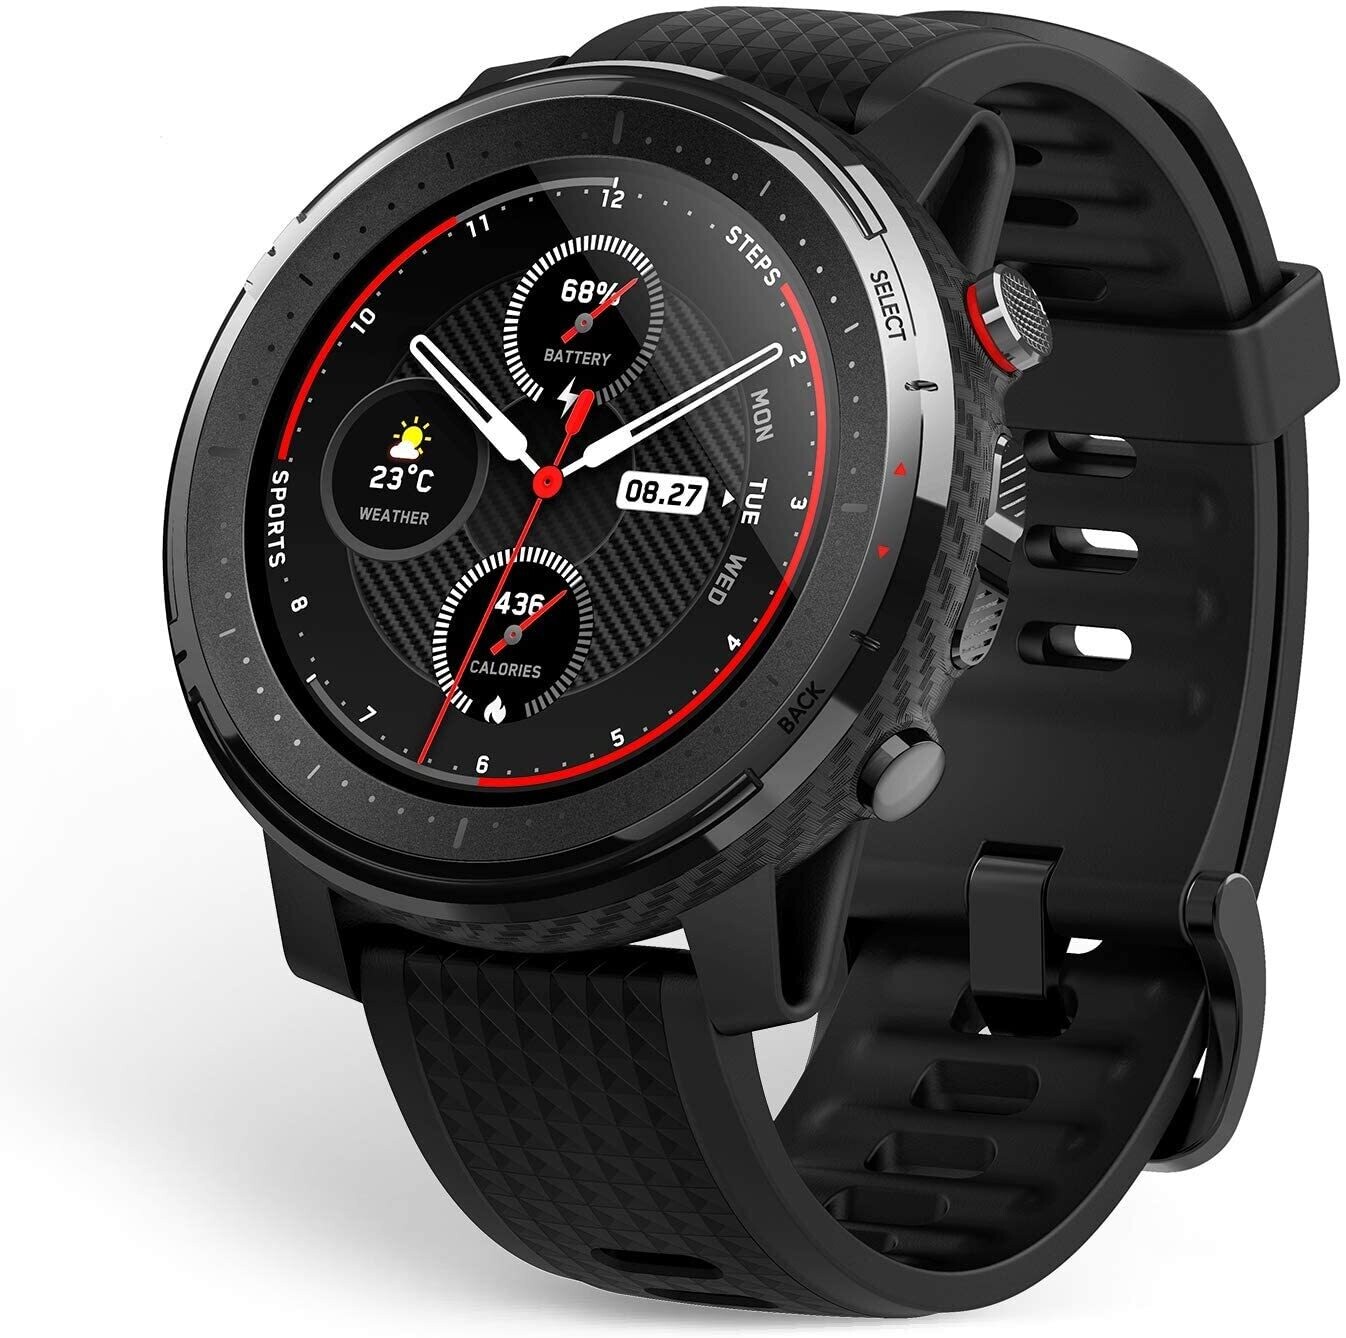 Amazfit Stratos 3 Sports Smartwatch Powered by FirstBeat, 1.34” Full Round Display, 80-Sports Modes, Standalone Music Playback, GPS, Bluetooth, Water Resistant, Black